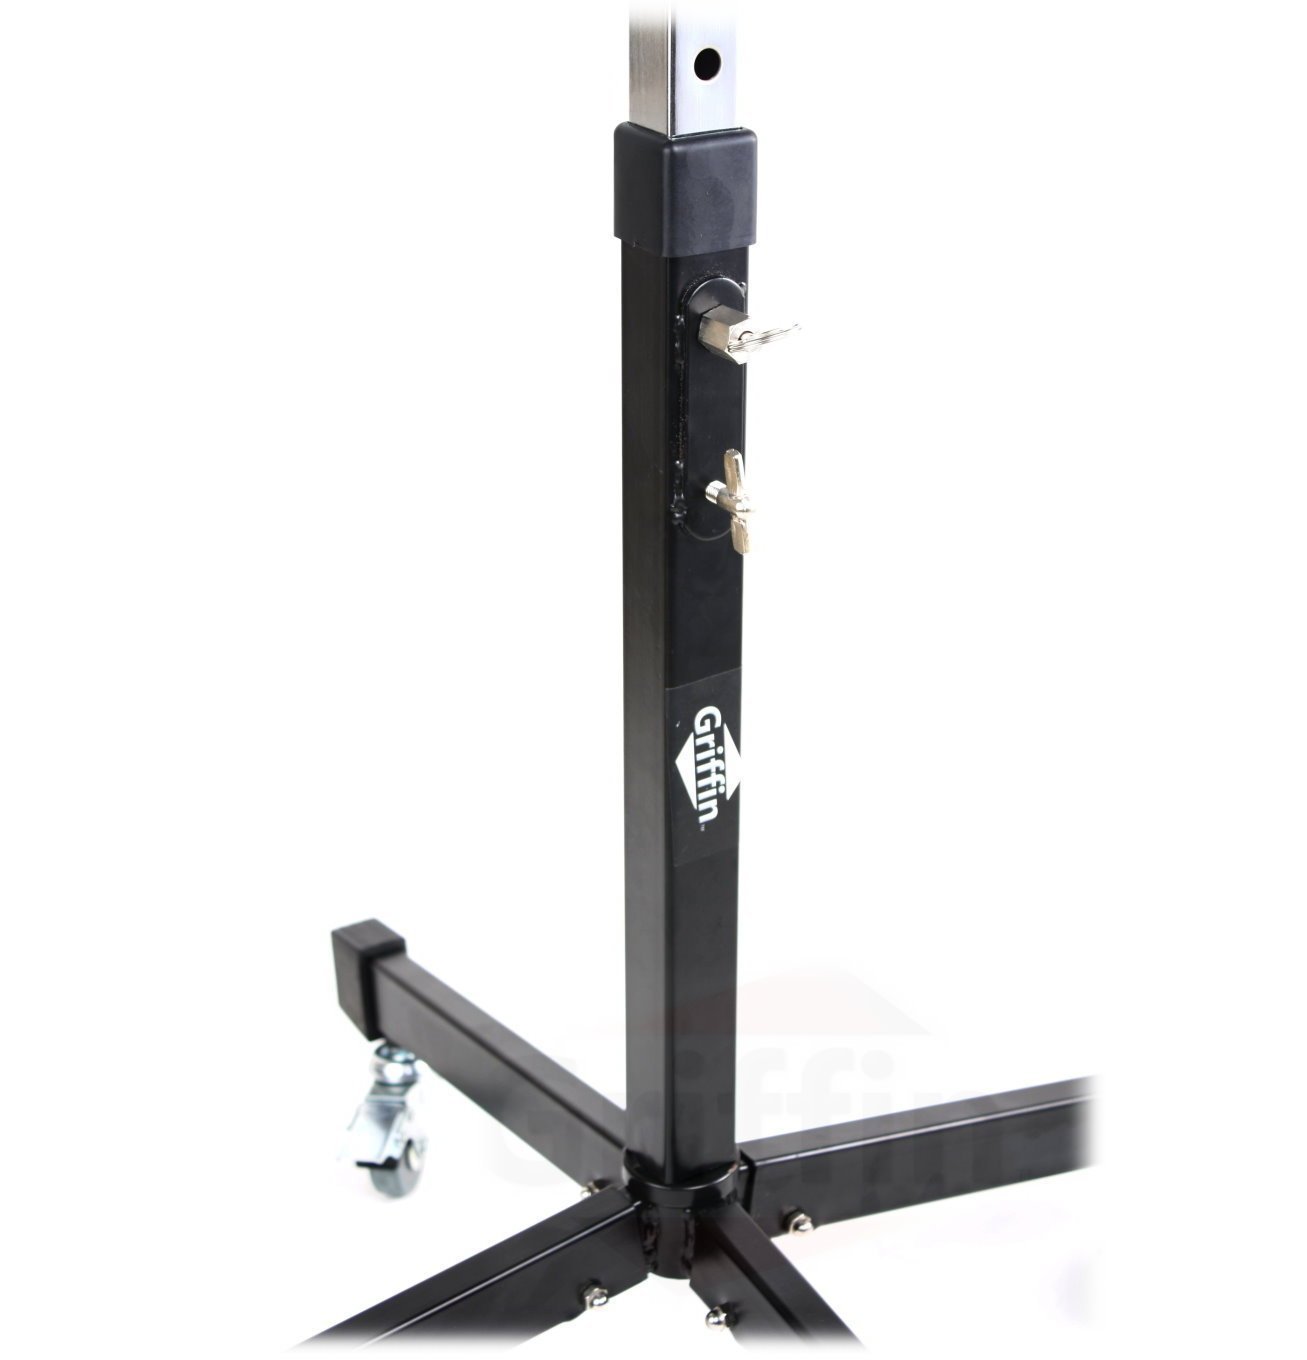 https://griffin-stands.com/wp-content/uploads/imported/Mobile-Studio-Mixer-Stand-DJ-Cart-by-Griffin-Rolling-Standing-Rack-On-Casters-with-Adjustable-HeightPortable-Turntabl-B004THB824-3.jpg